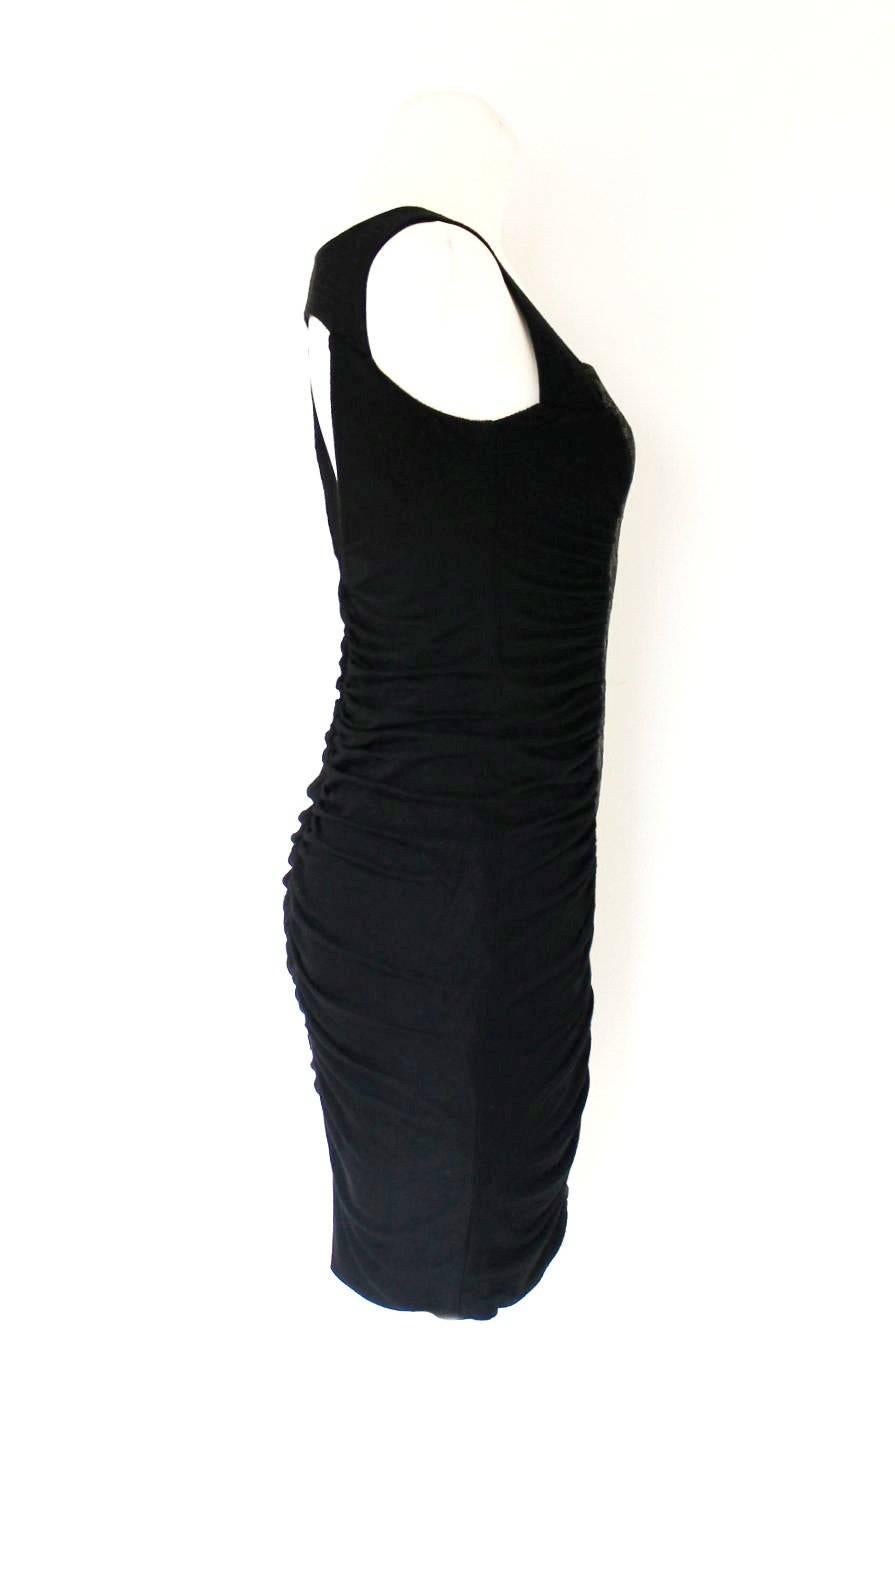 Black Iconic Gianni Versace Couture Draped Bodycon Cutout Dress